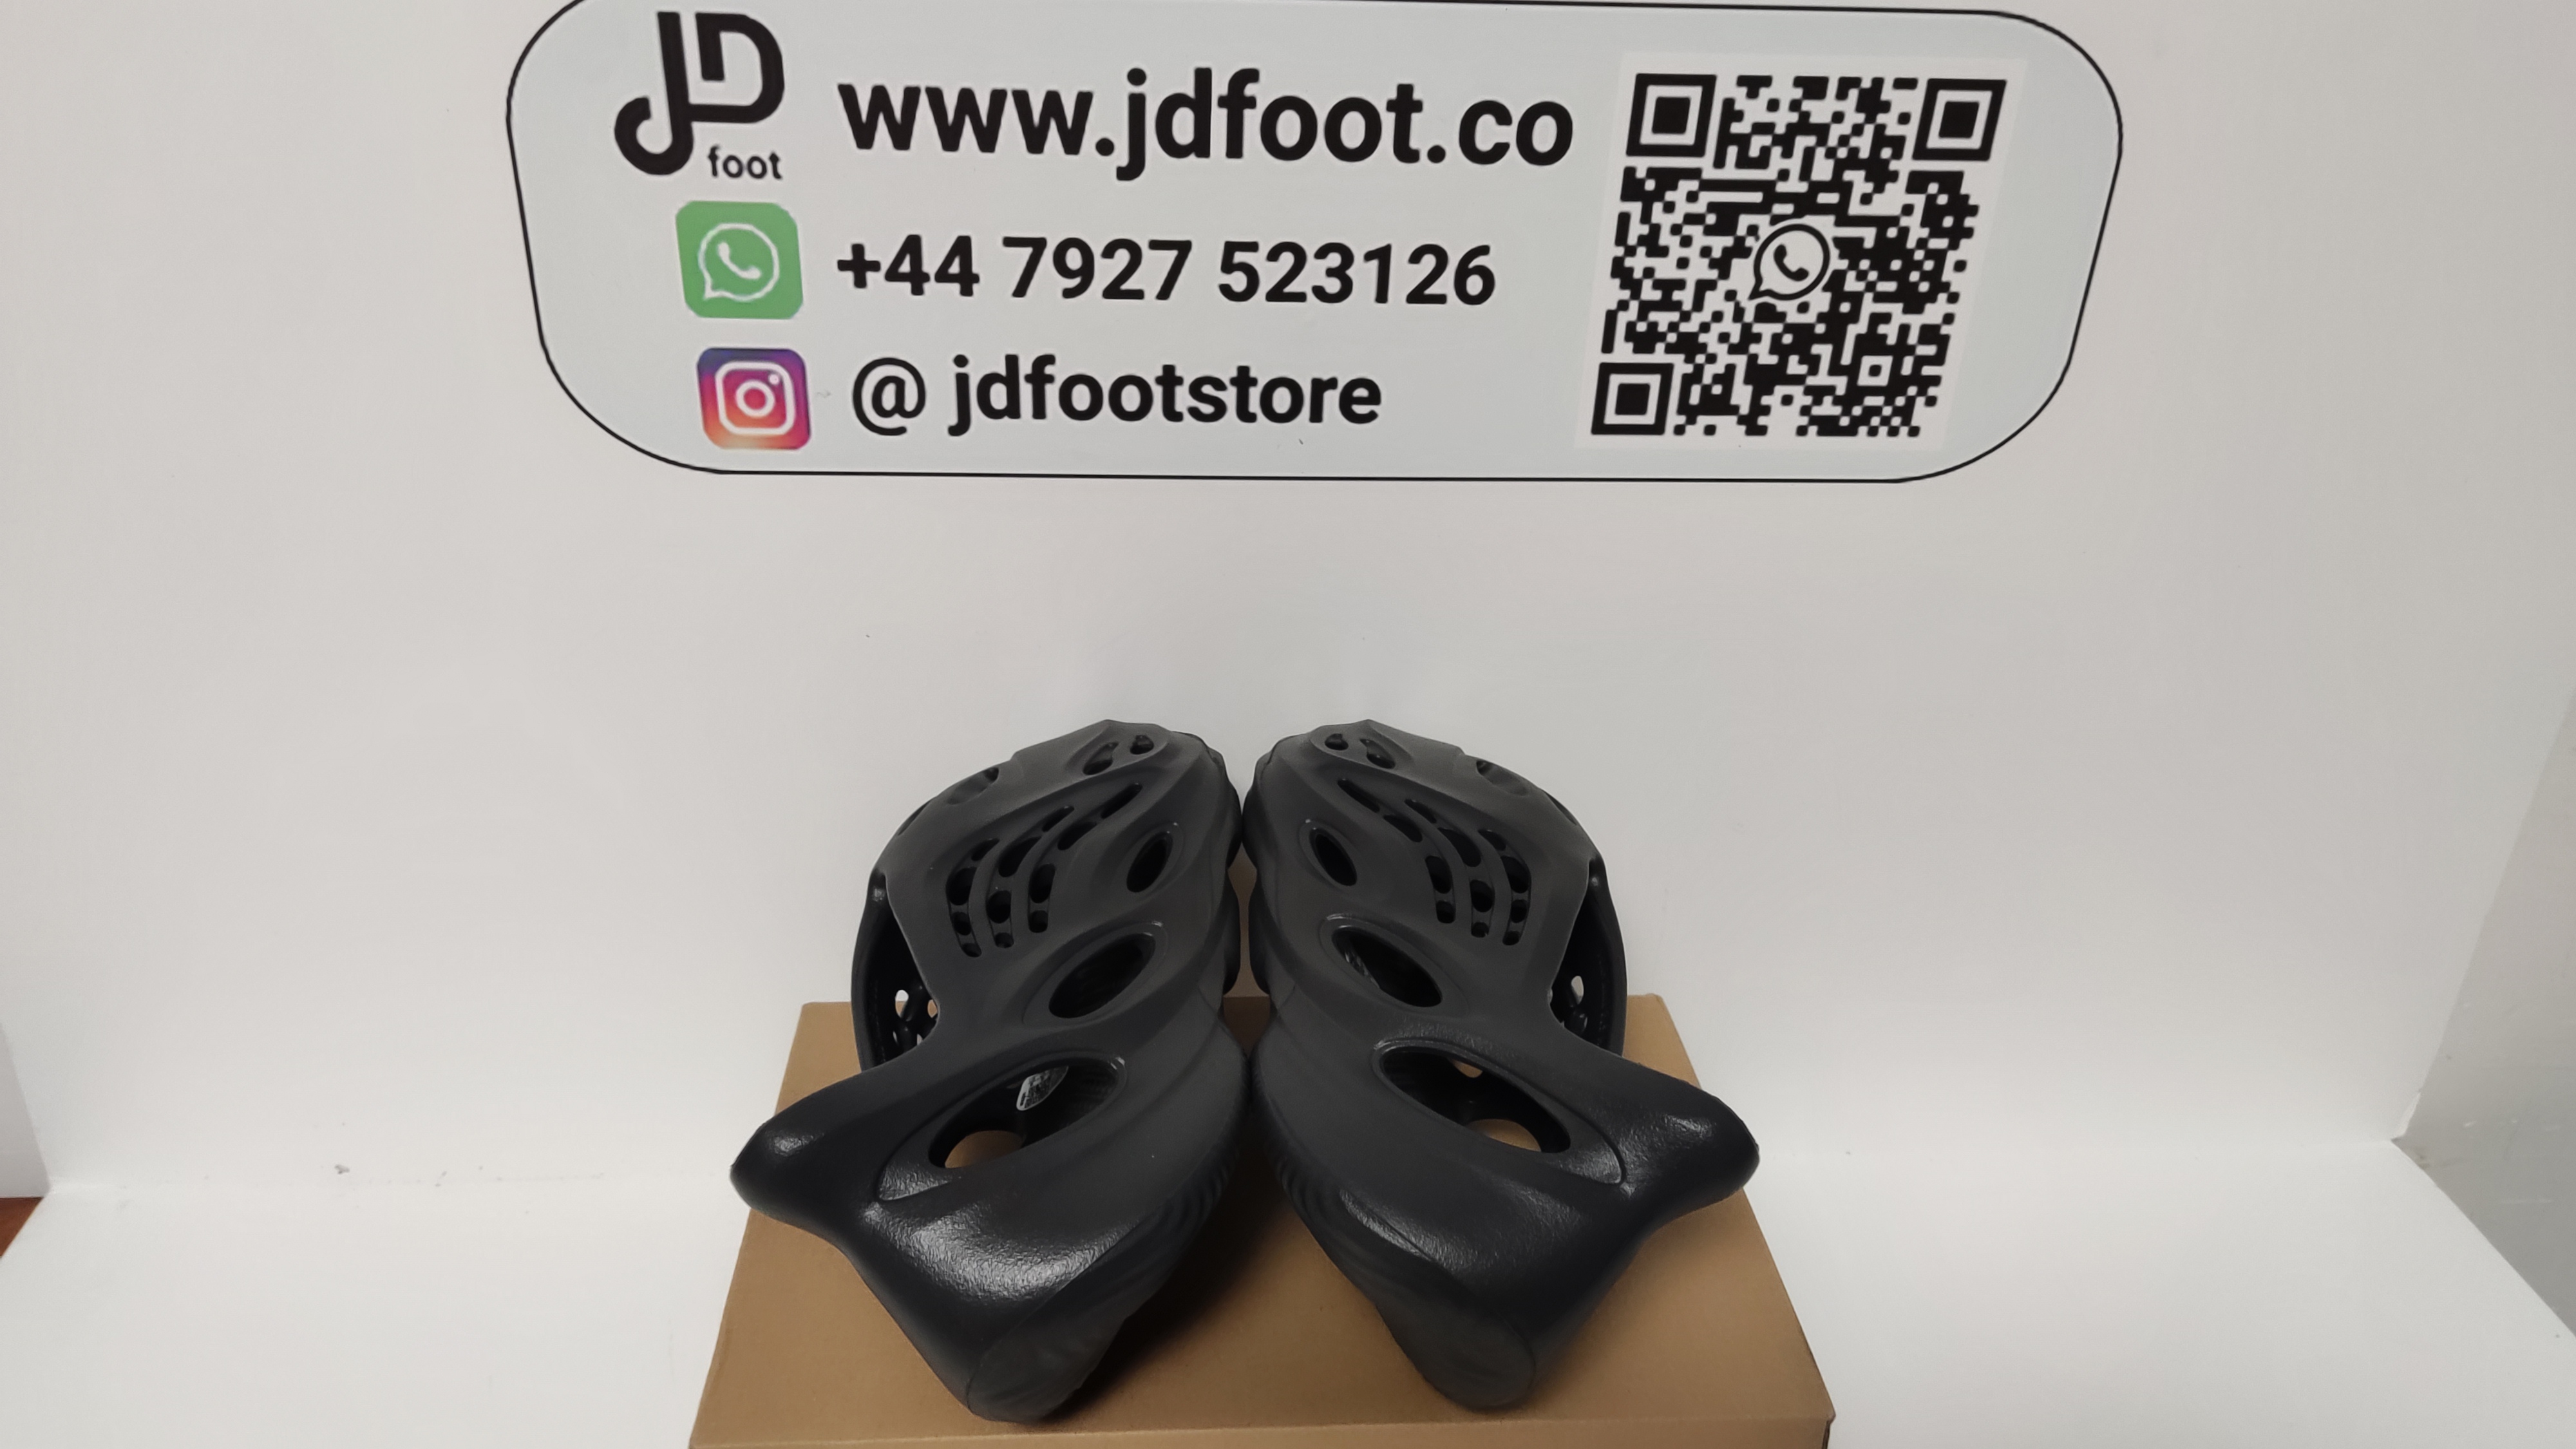 QC Picture Yeezy Foam Runner Replica From Onyx Jdfoot